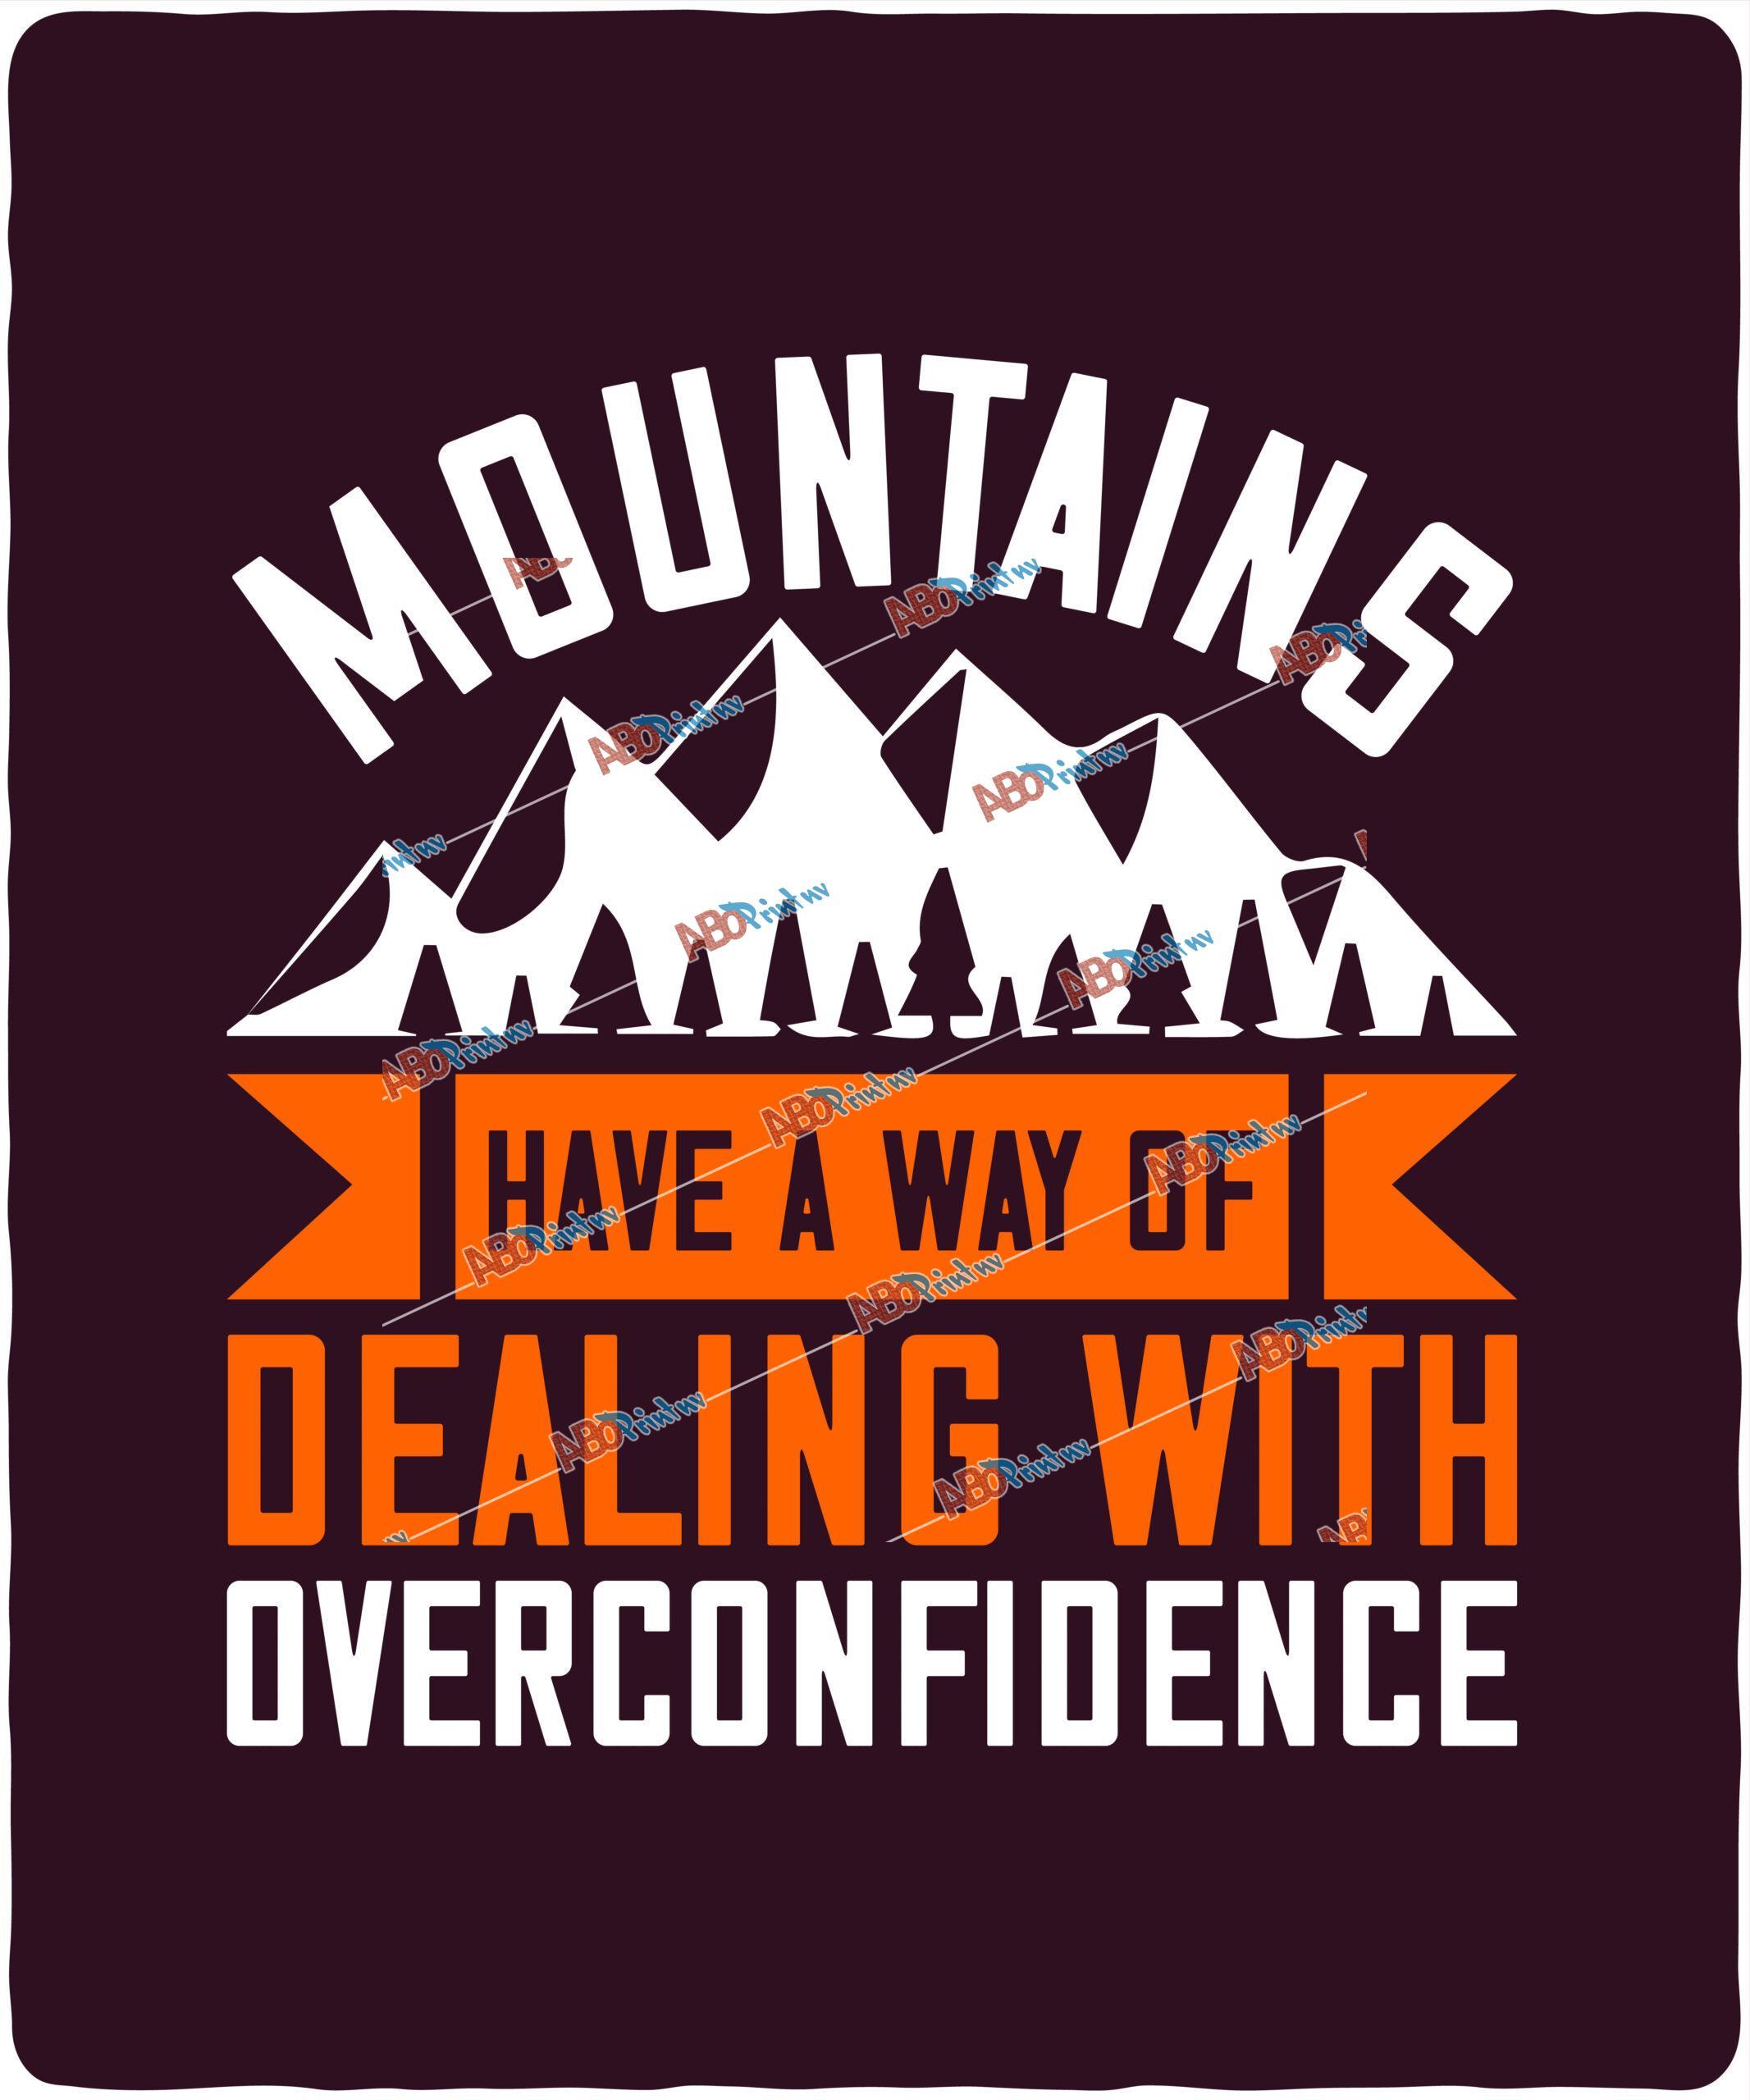 Mountains have a way of dealing with overconfidence